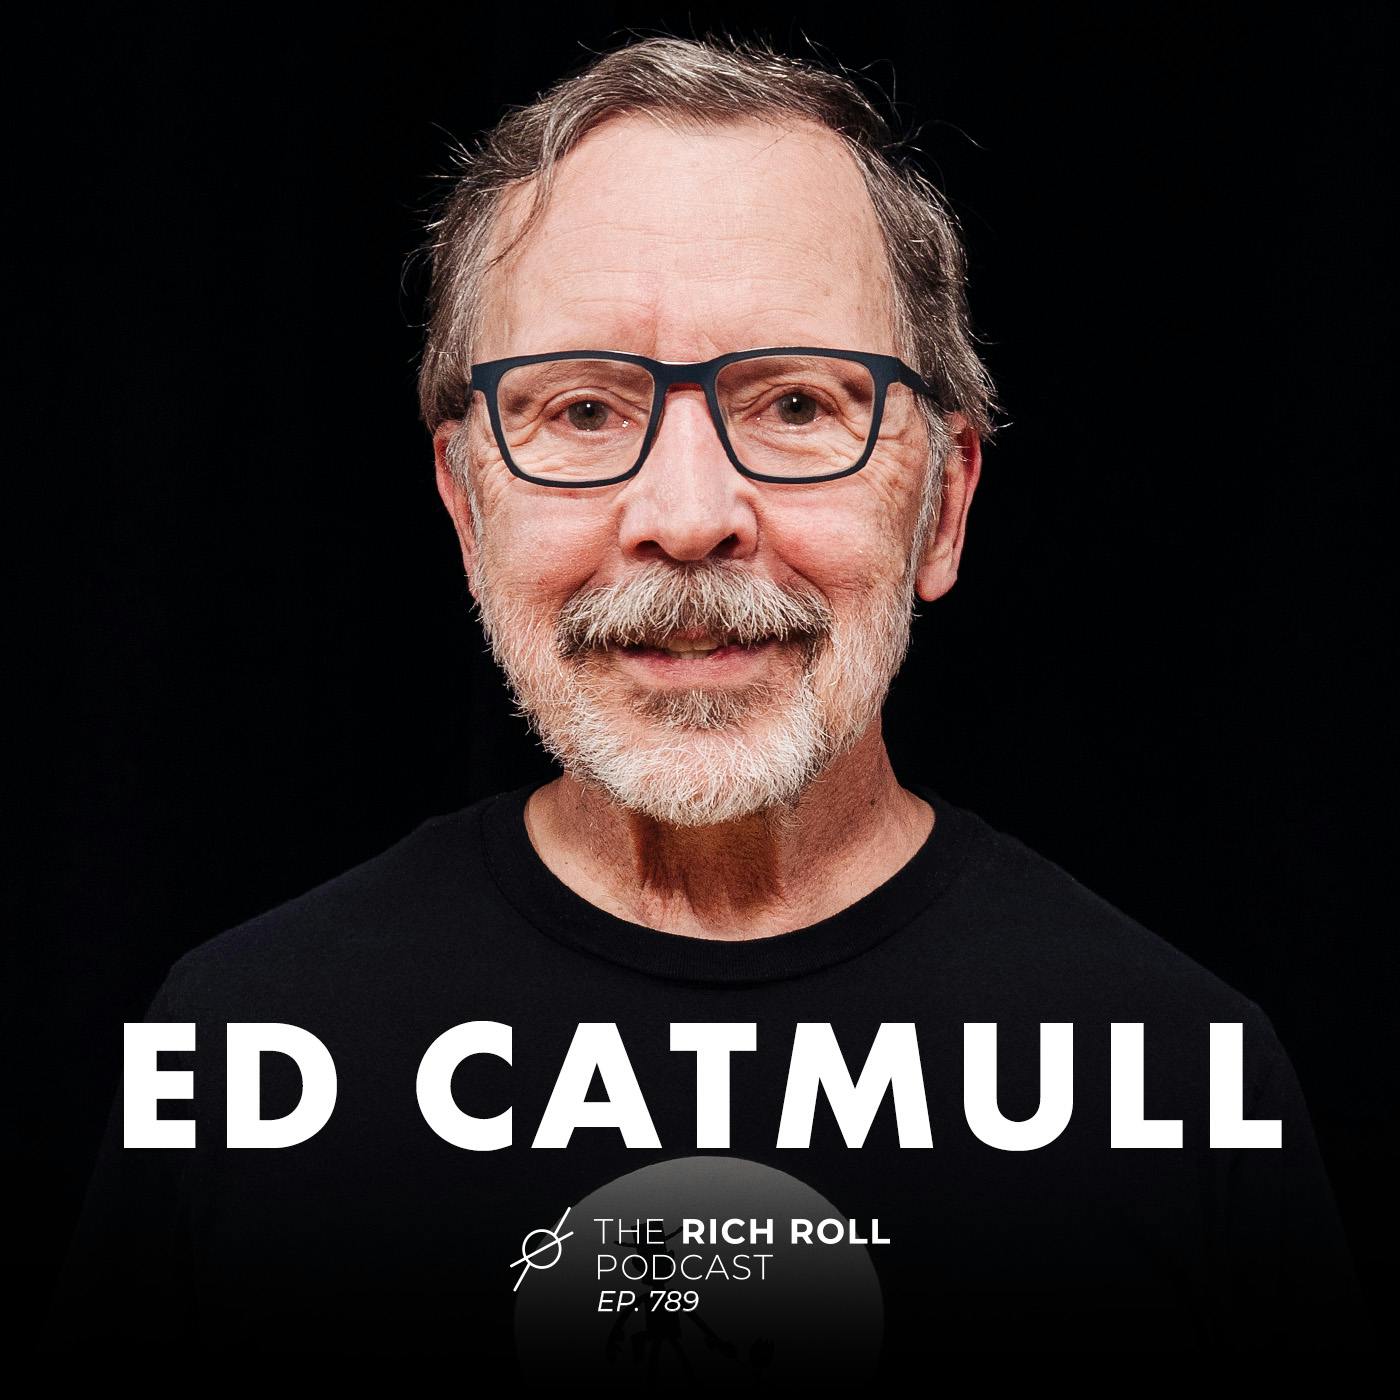 Pixar Co-Founder Ed Catmull On The Art & Science Of Creativity, How To Do Your Best Work, Bring Out The Best In Others & Lead